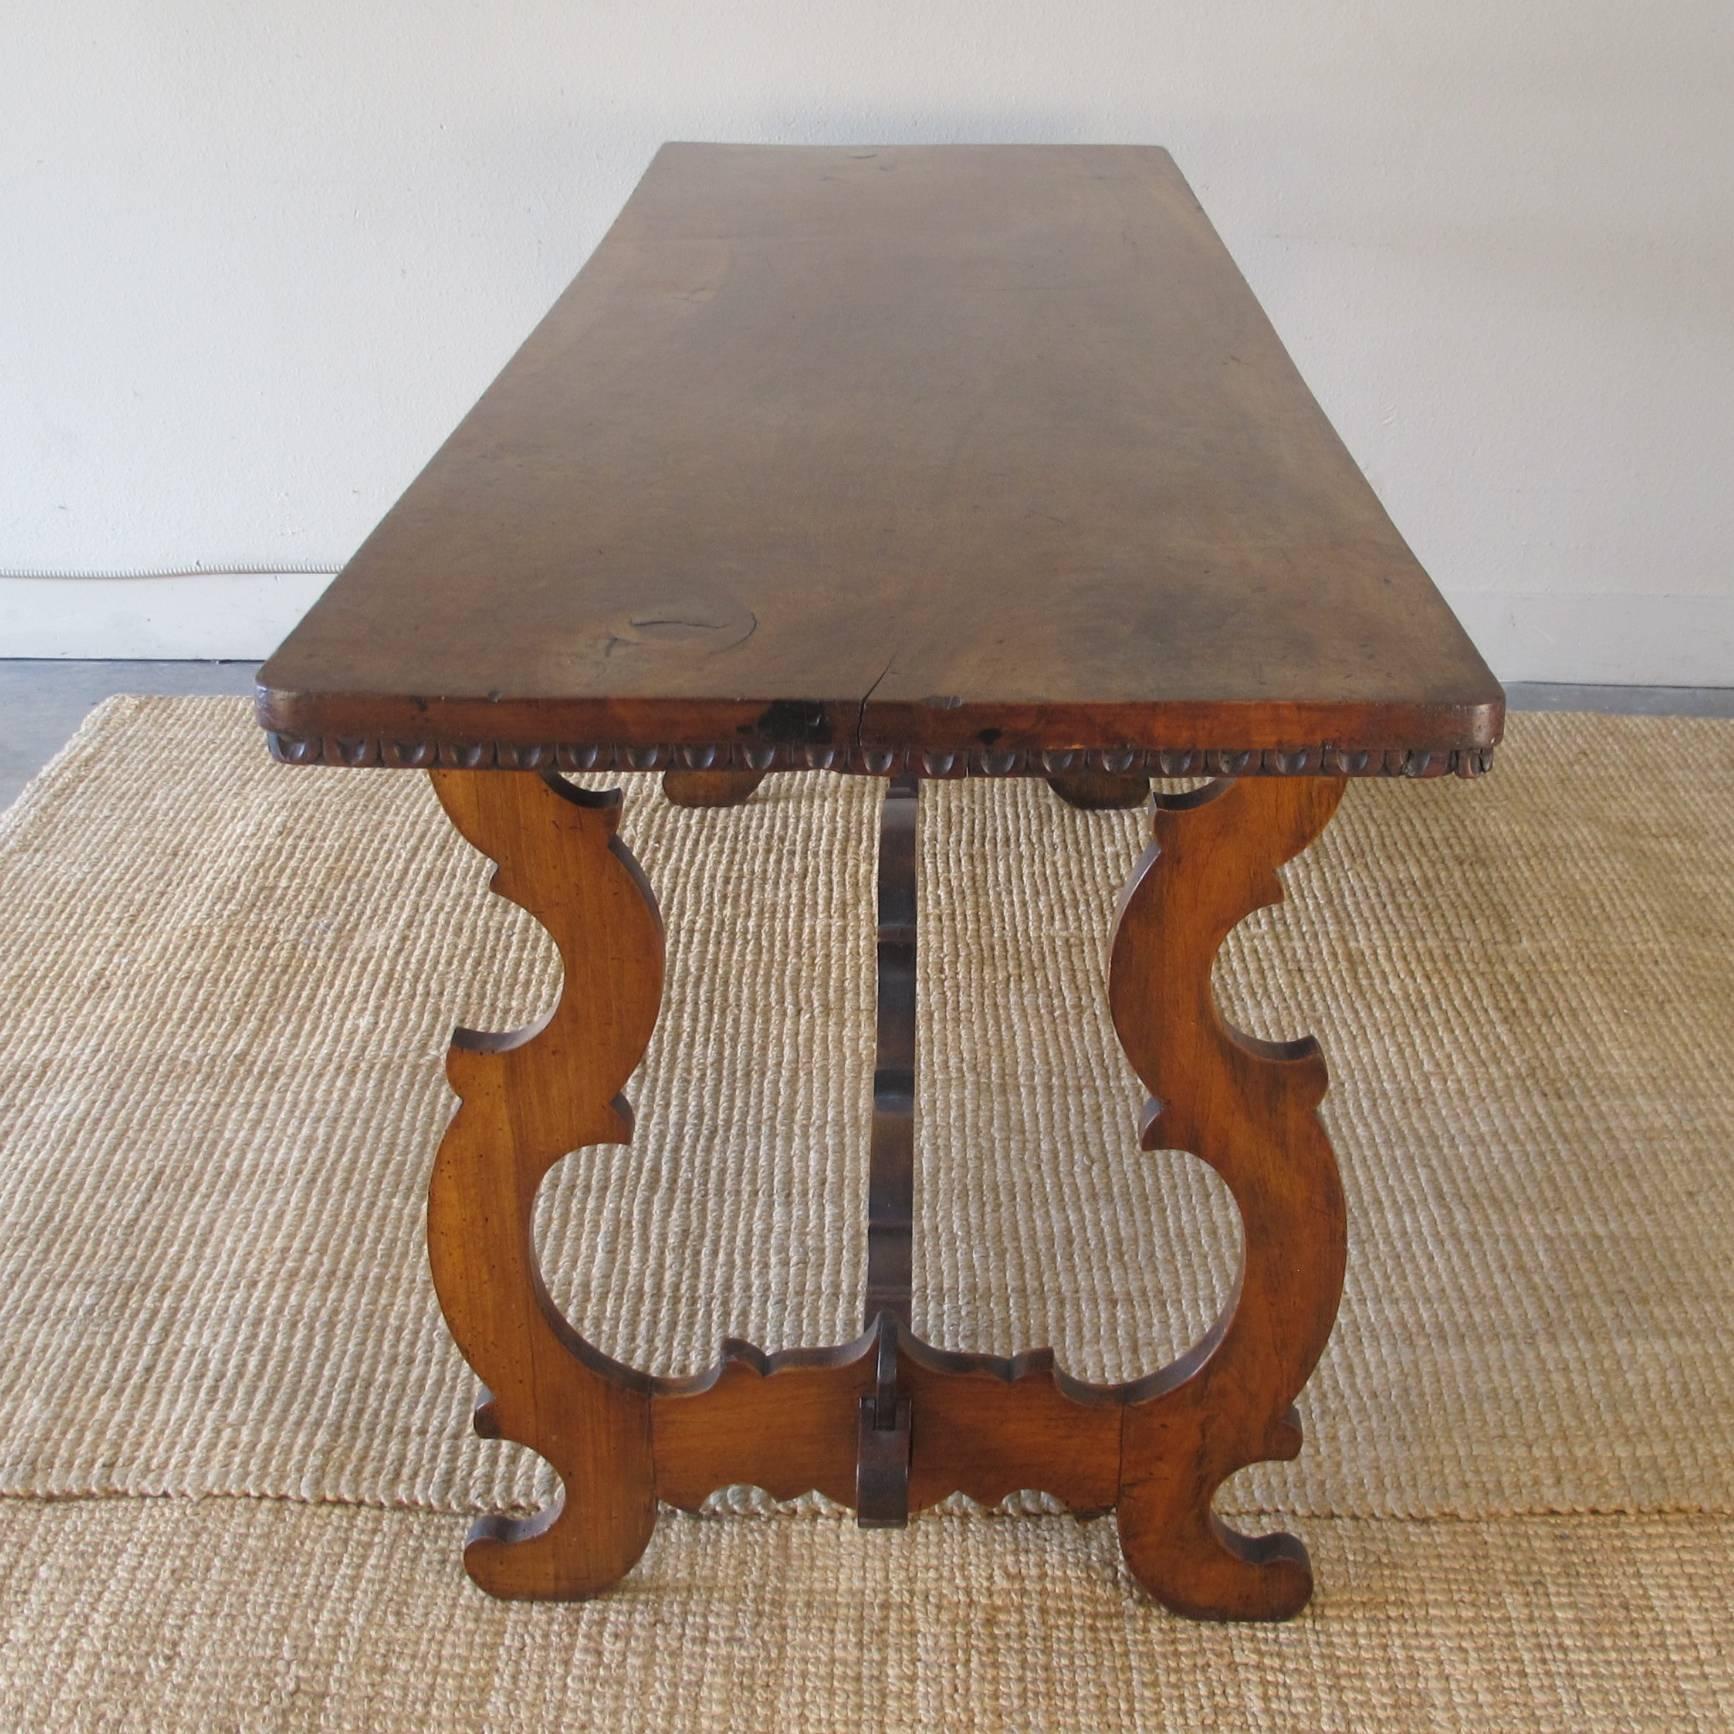 Late 18th, early 19th century Spanish walnut trestle table. Gorgeous color. Courtesy to the trade.